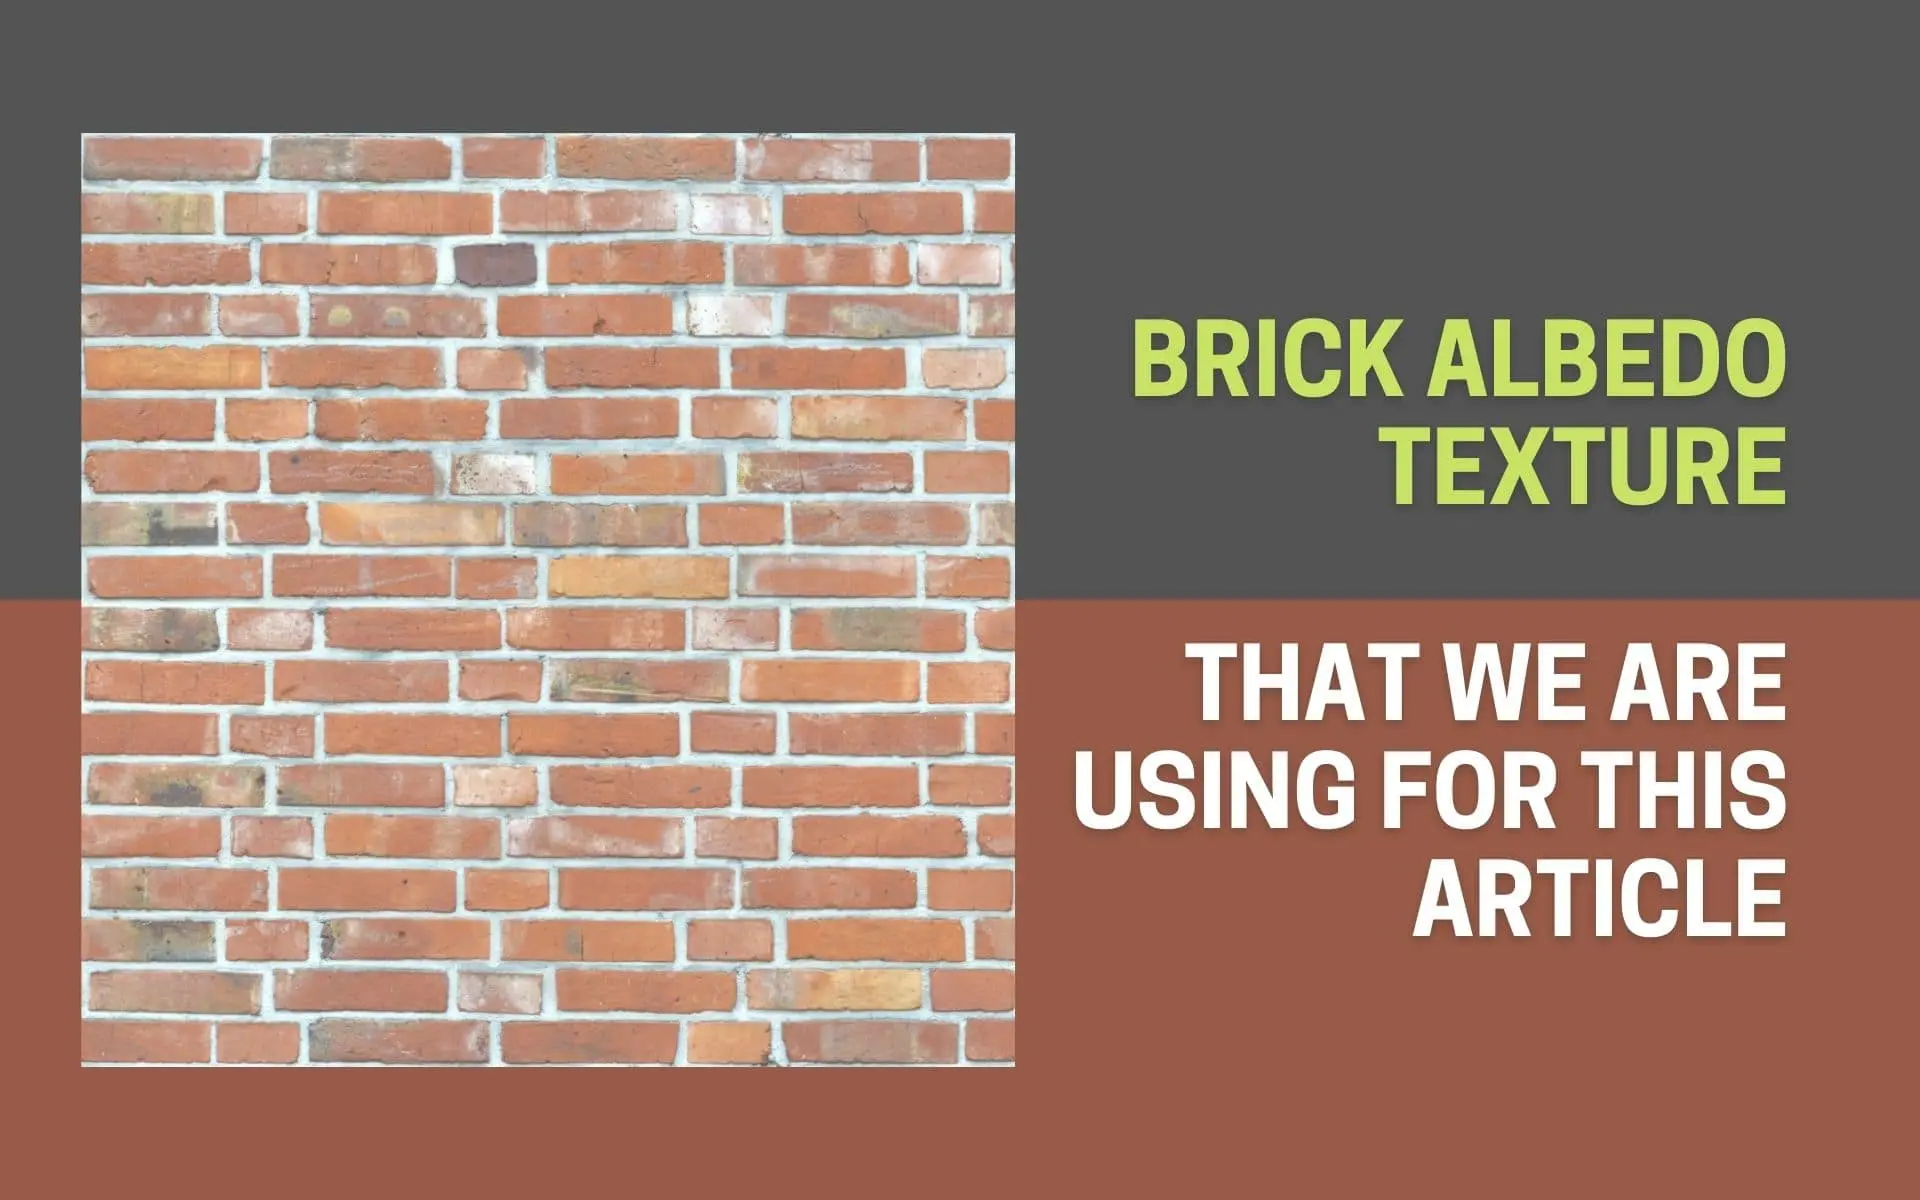 Image showing the Brick Albedo Texture used in this article